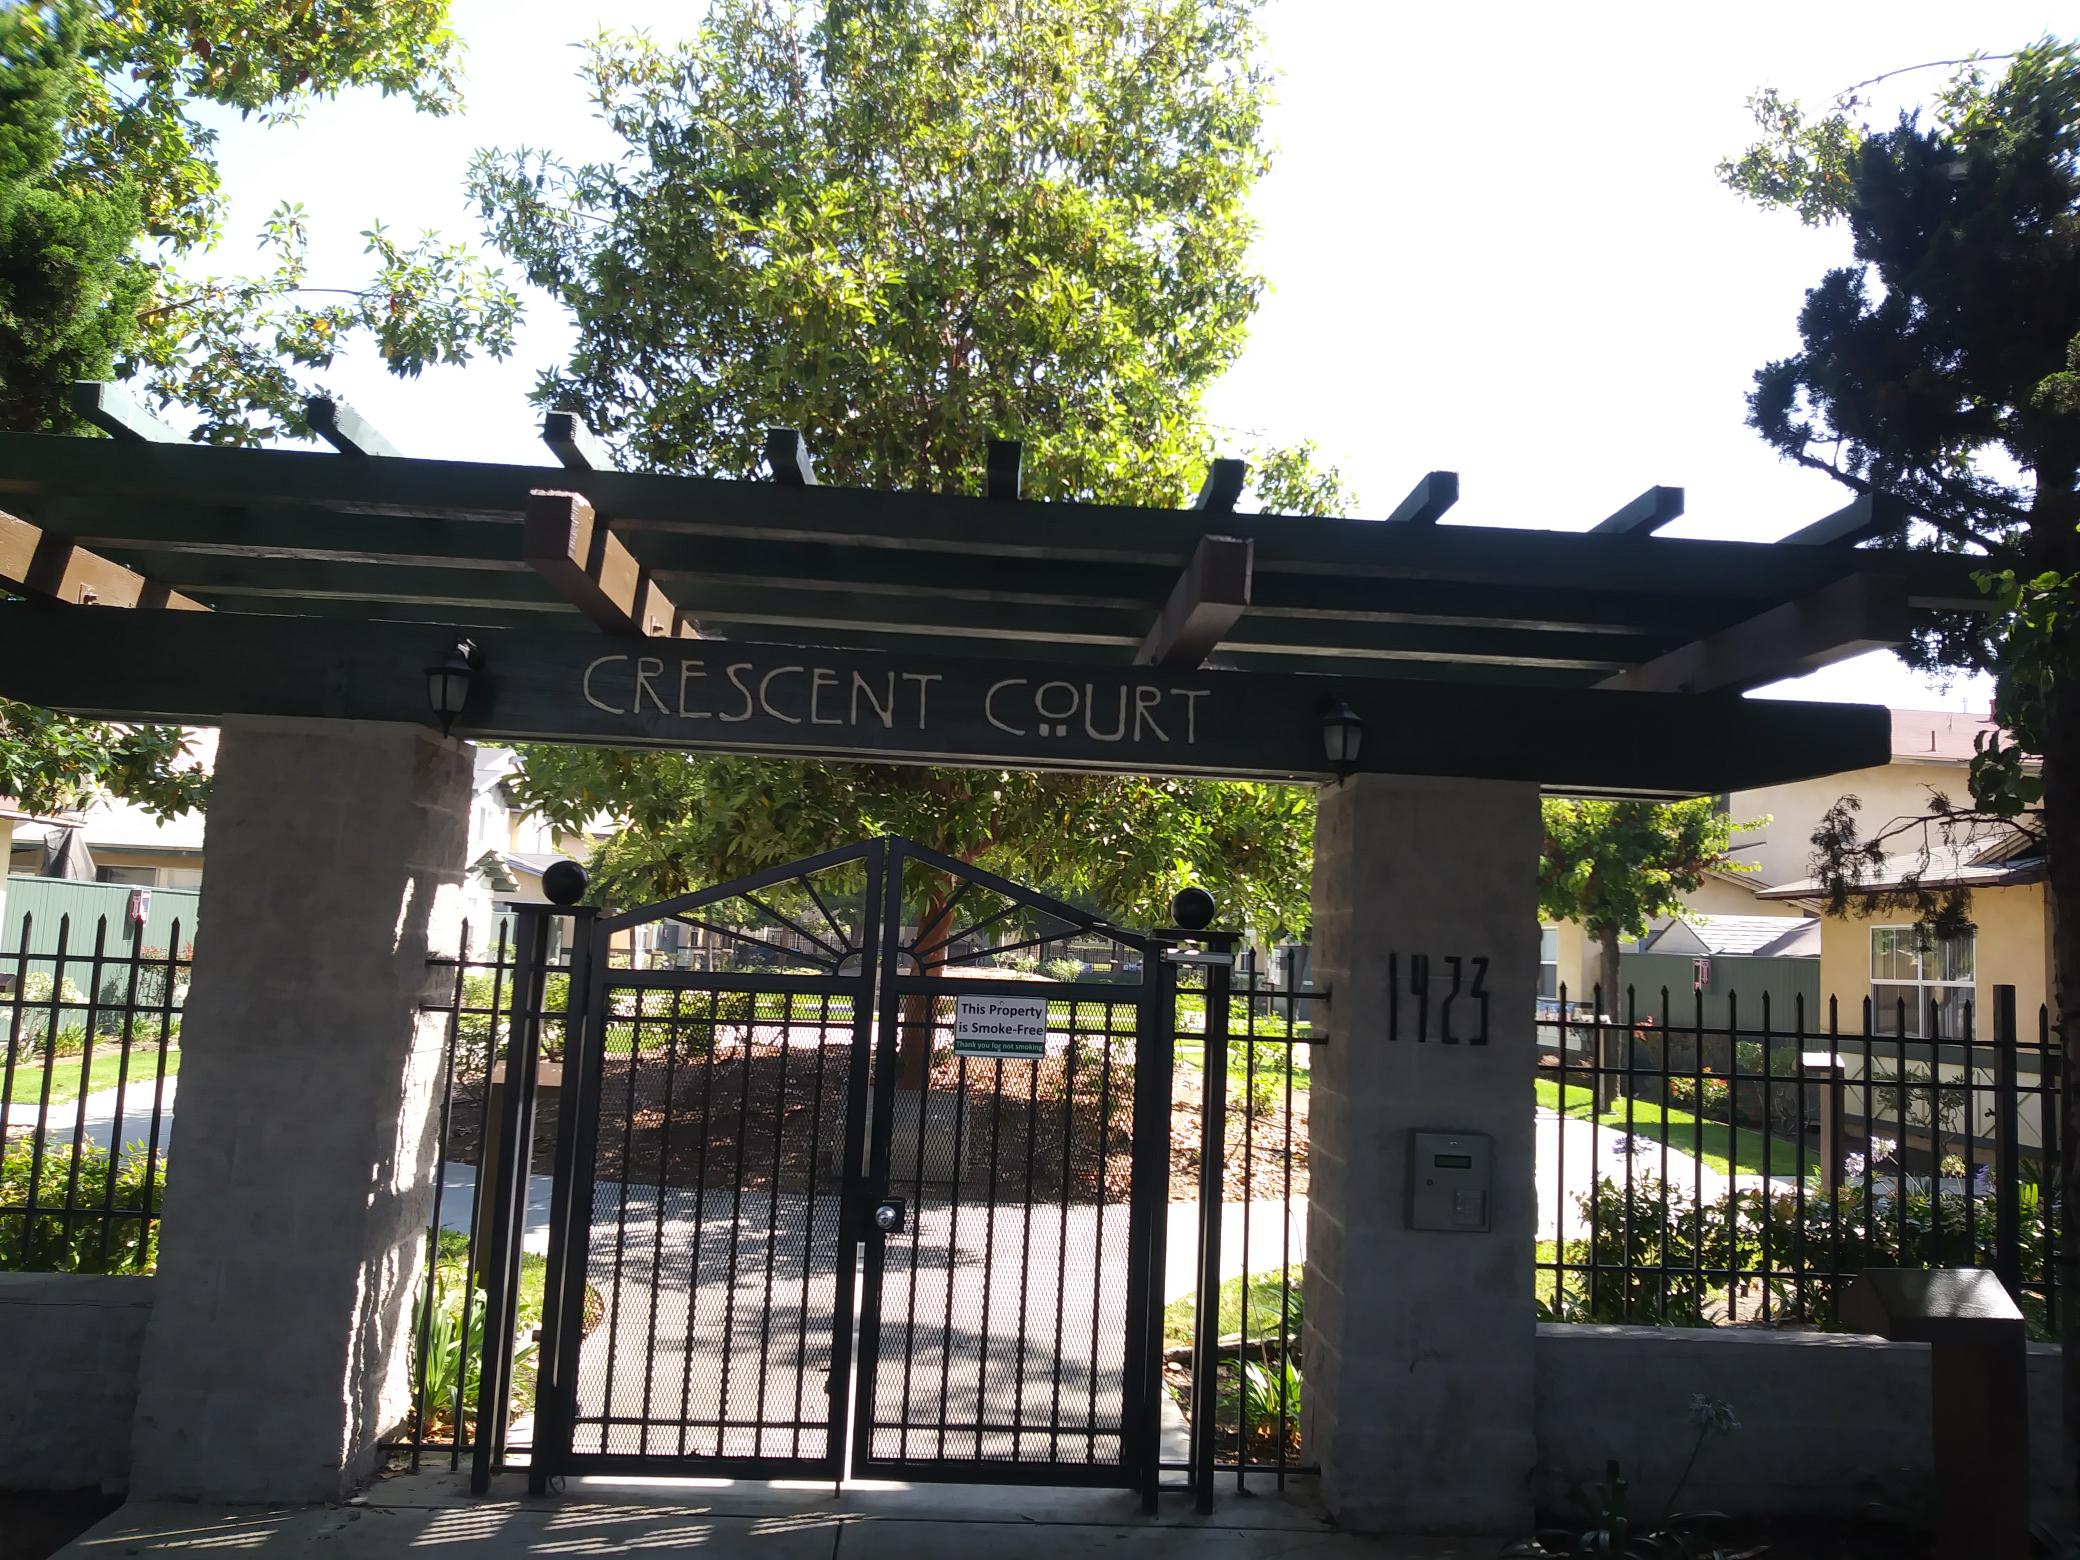 Front view of Crescent Court Apartments. Large gate leading into courtyard. Large tree in the center and on either side of it there is side walk access. Along walkway is grass and flower beds.